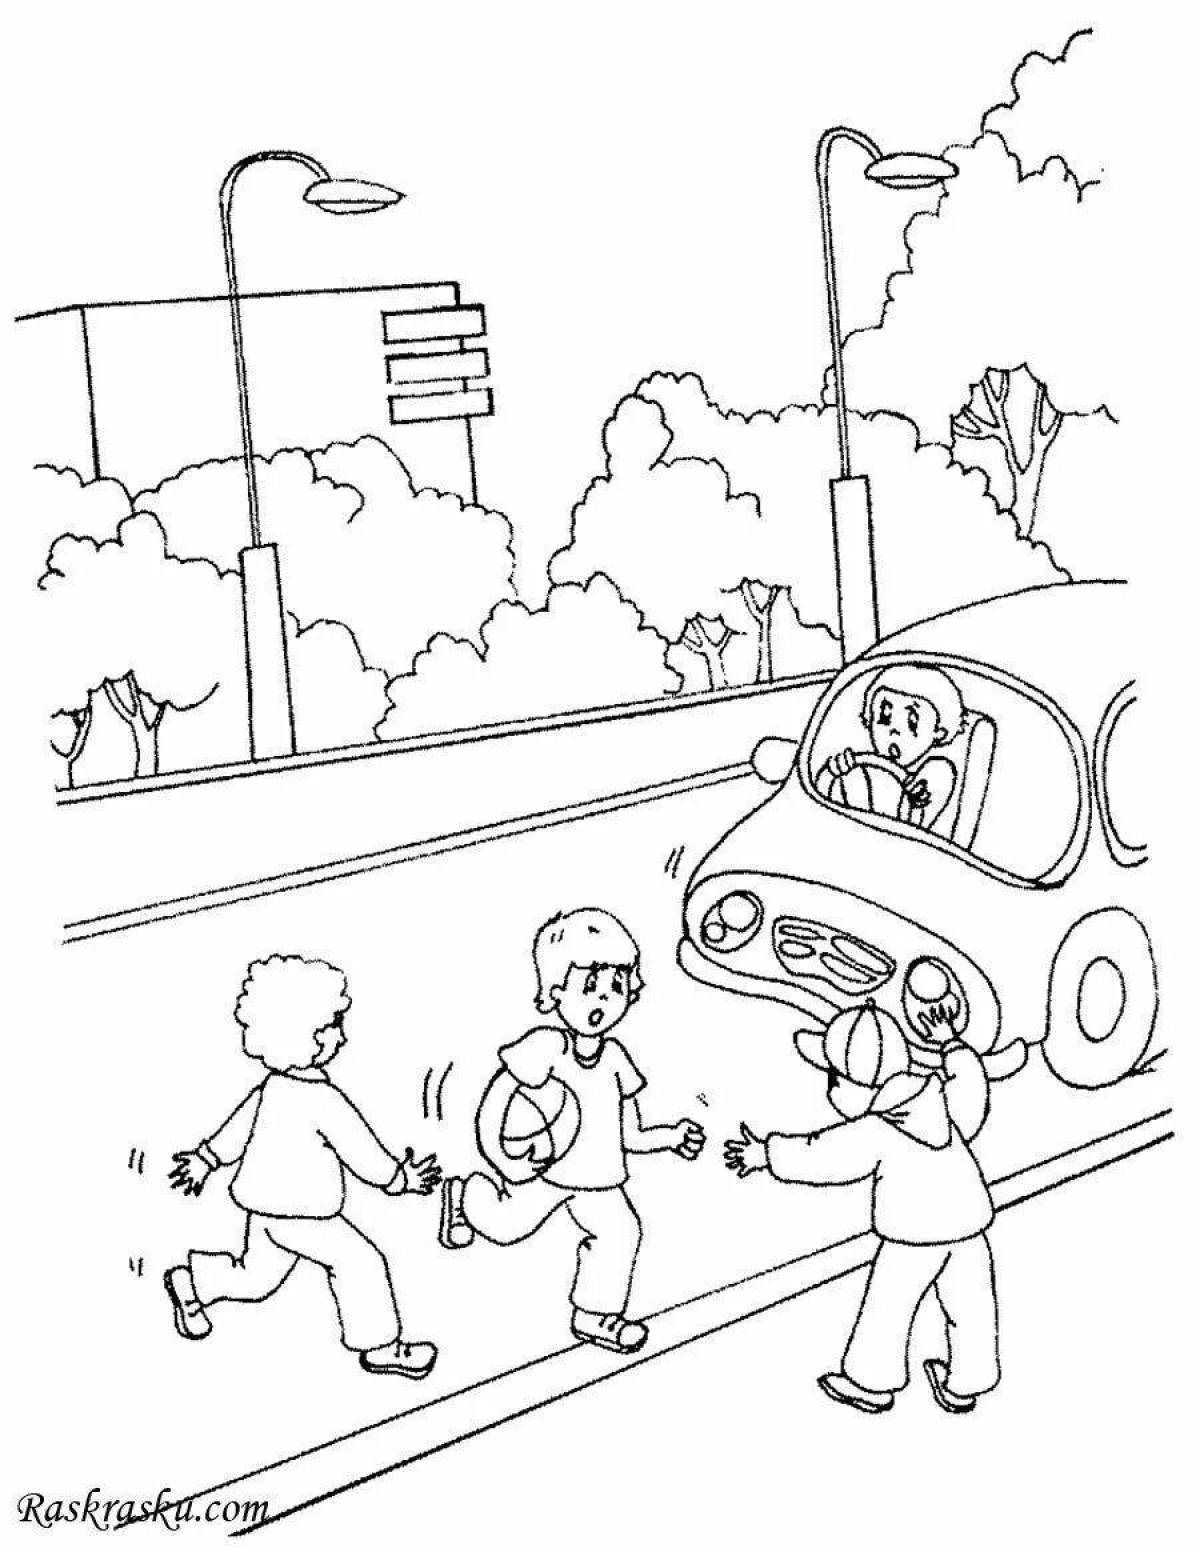 Joyful watch out for the car coloring page